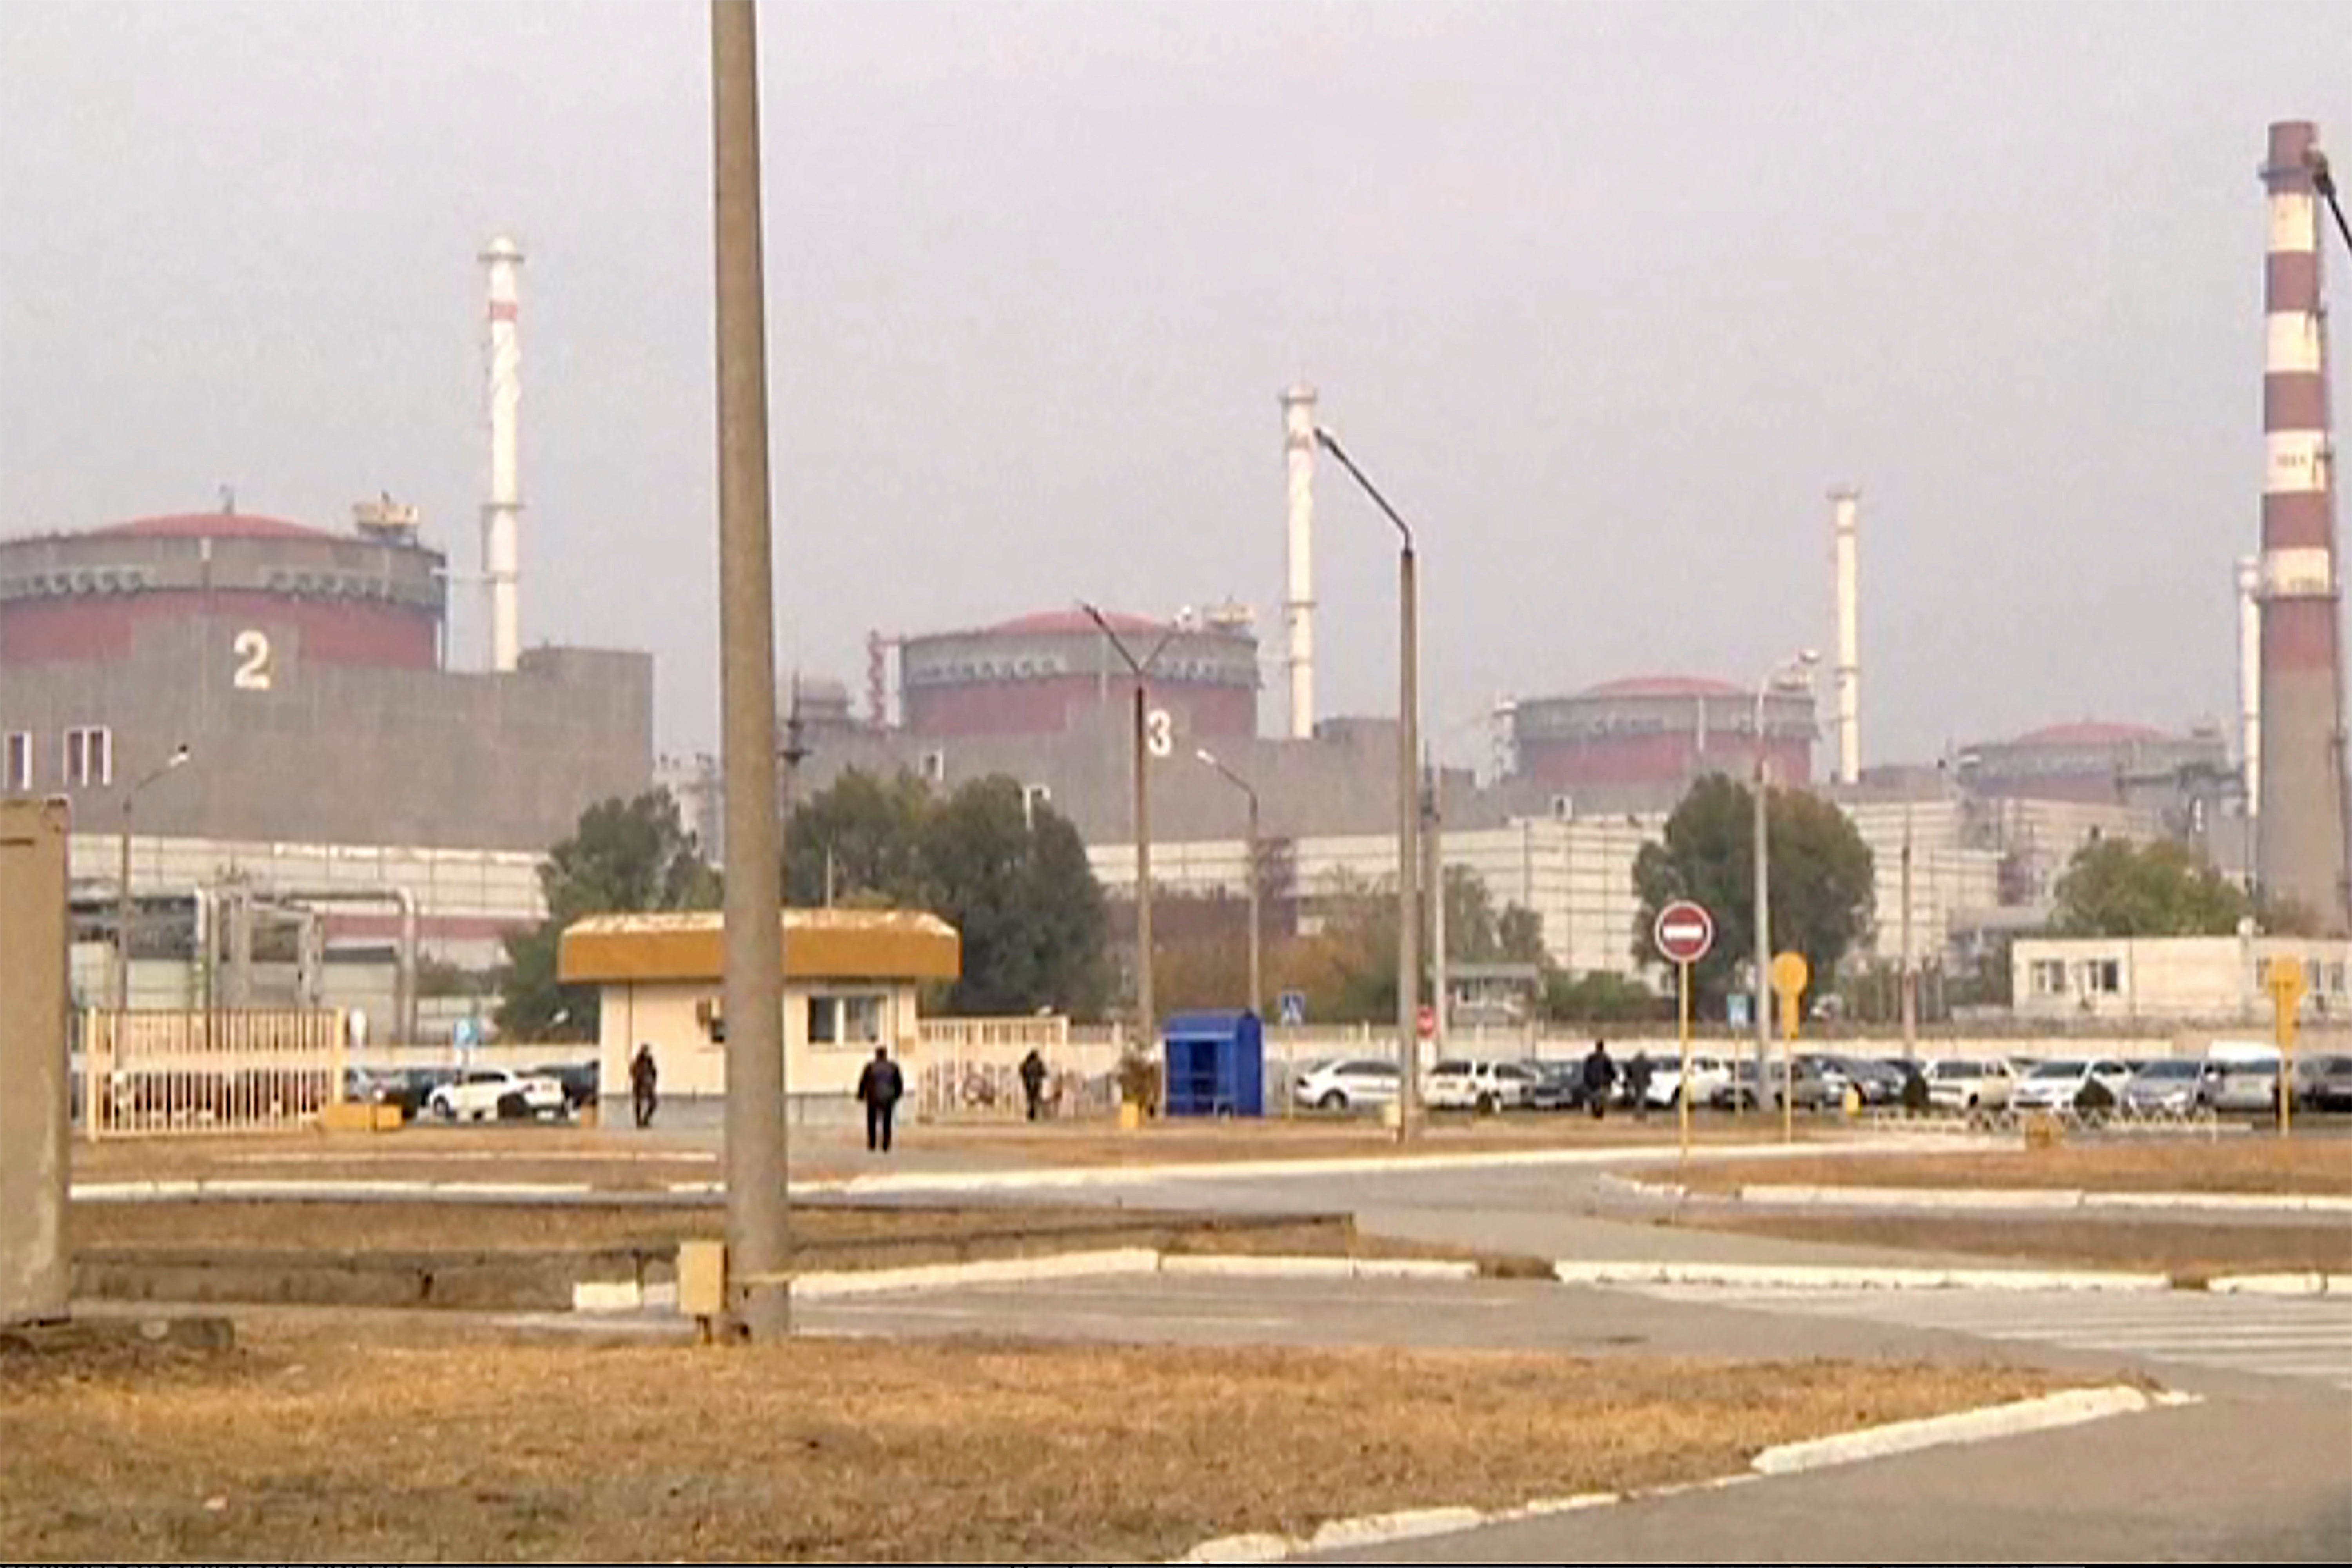 This image made from a video shows Zaporizhzhia nuclear plant in 2015